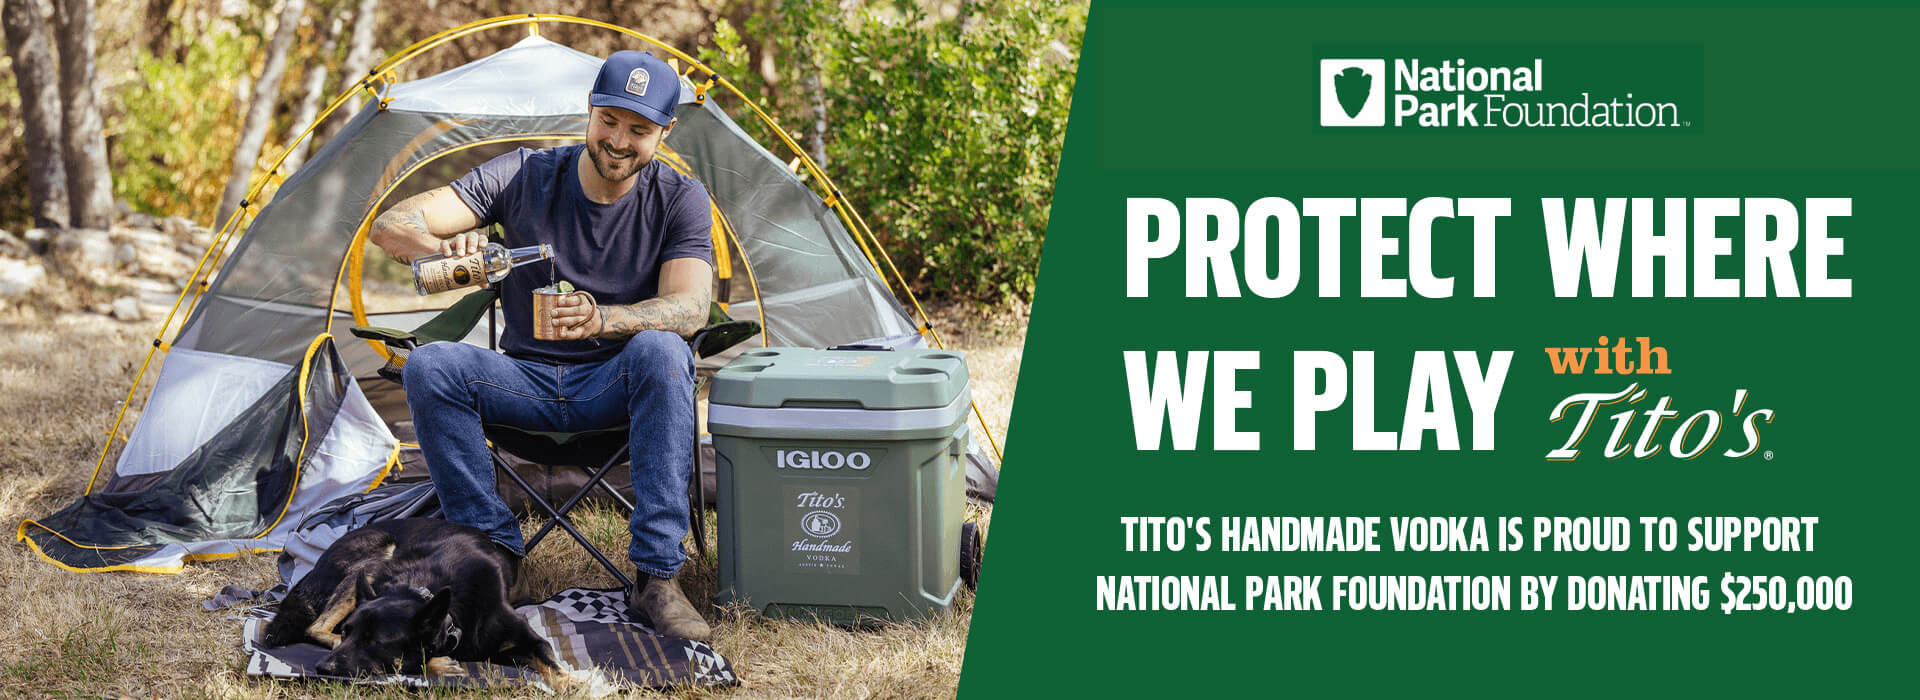 Protect where we play with Tito's'